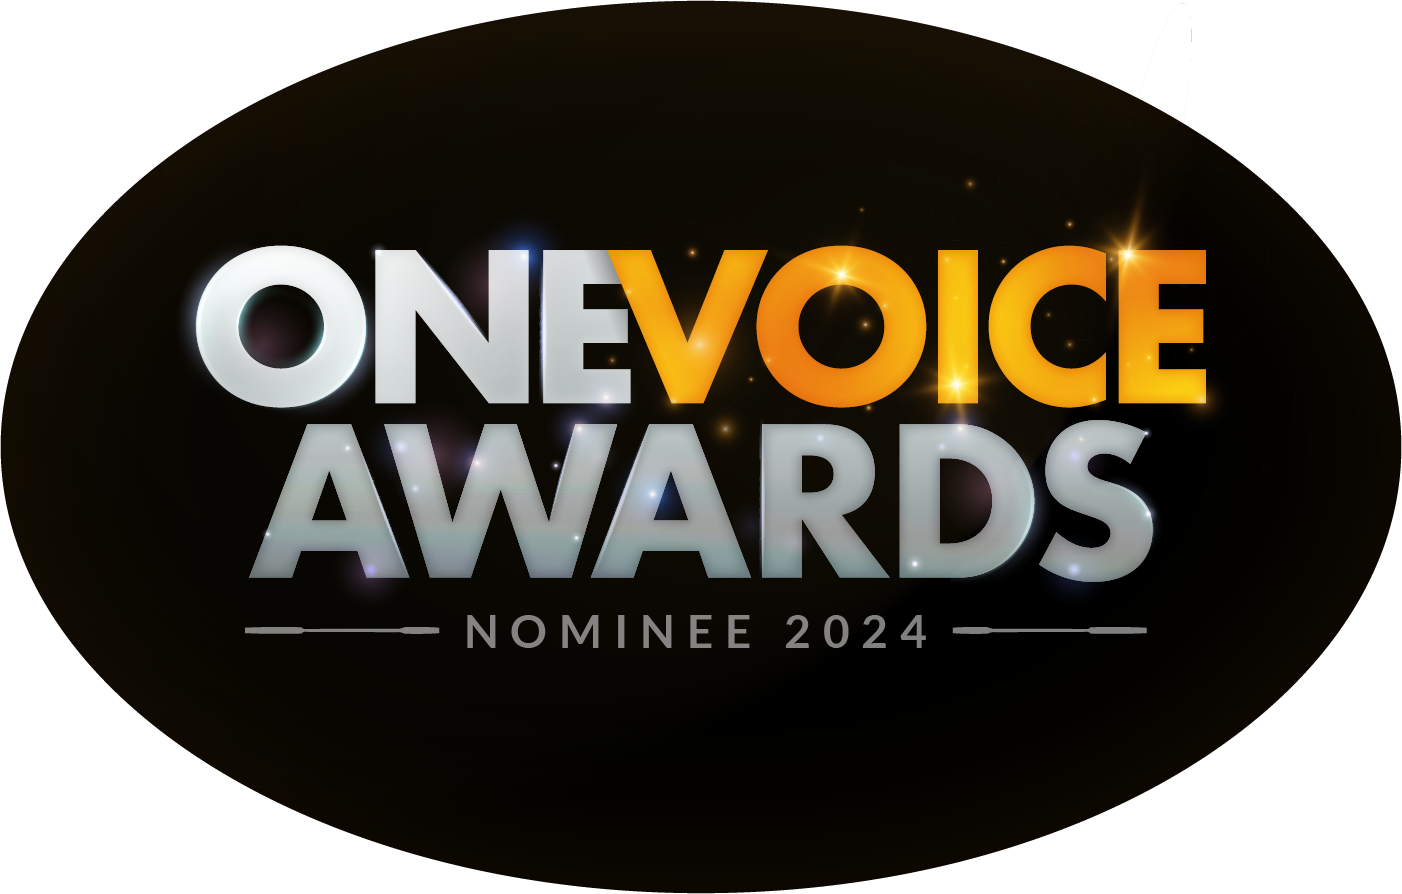 UK voiceover awards finalist badge for One Voice Awards 2024 - awarded for shortlisting for Best Overall Voiceover in a Corporate Video, and Best Male Voiceover Demo Reel